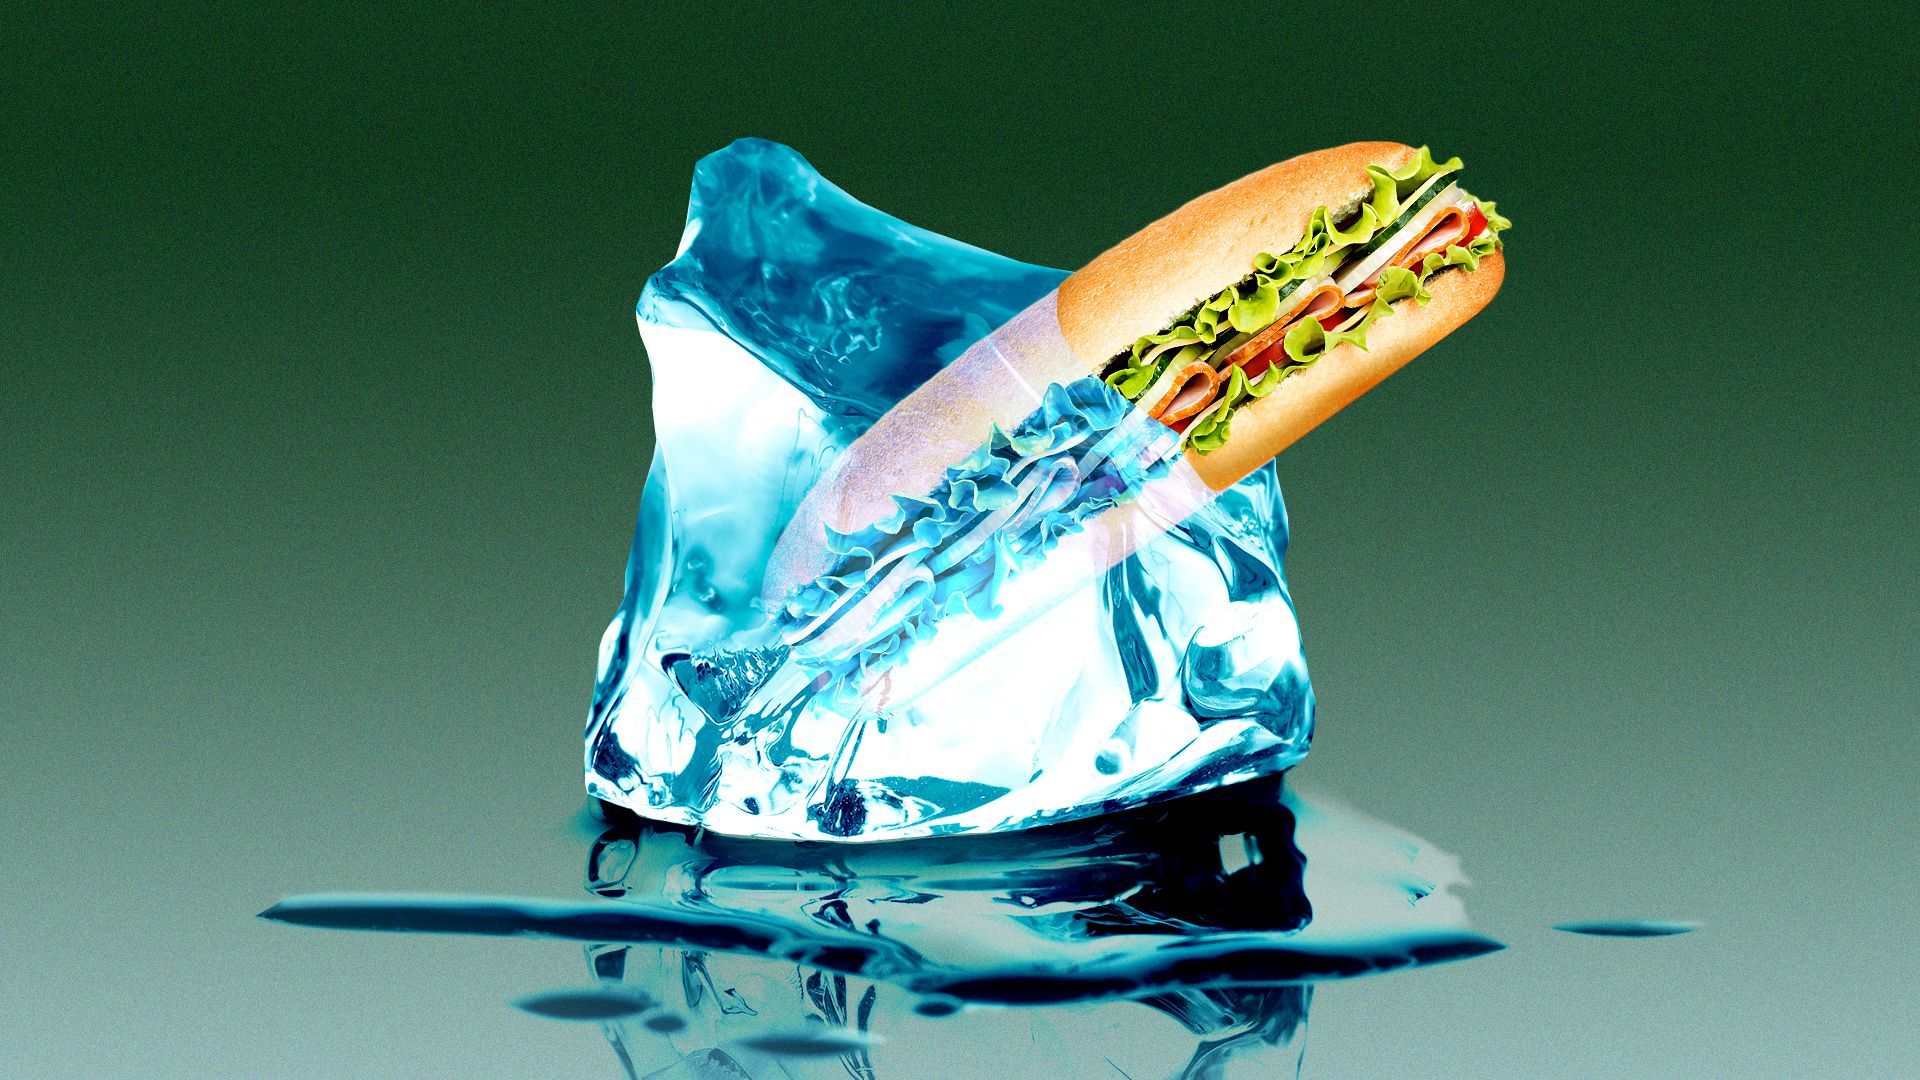 Illustration of a large sub sandwich sticking out a melting block of ice